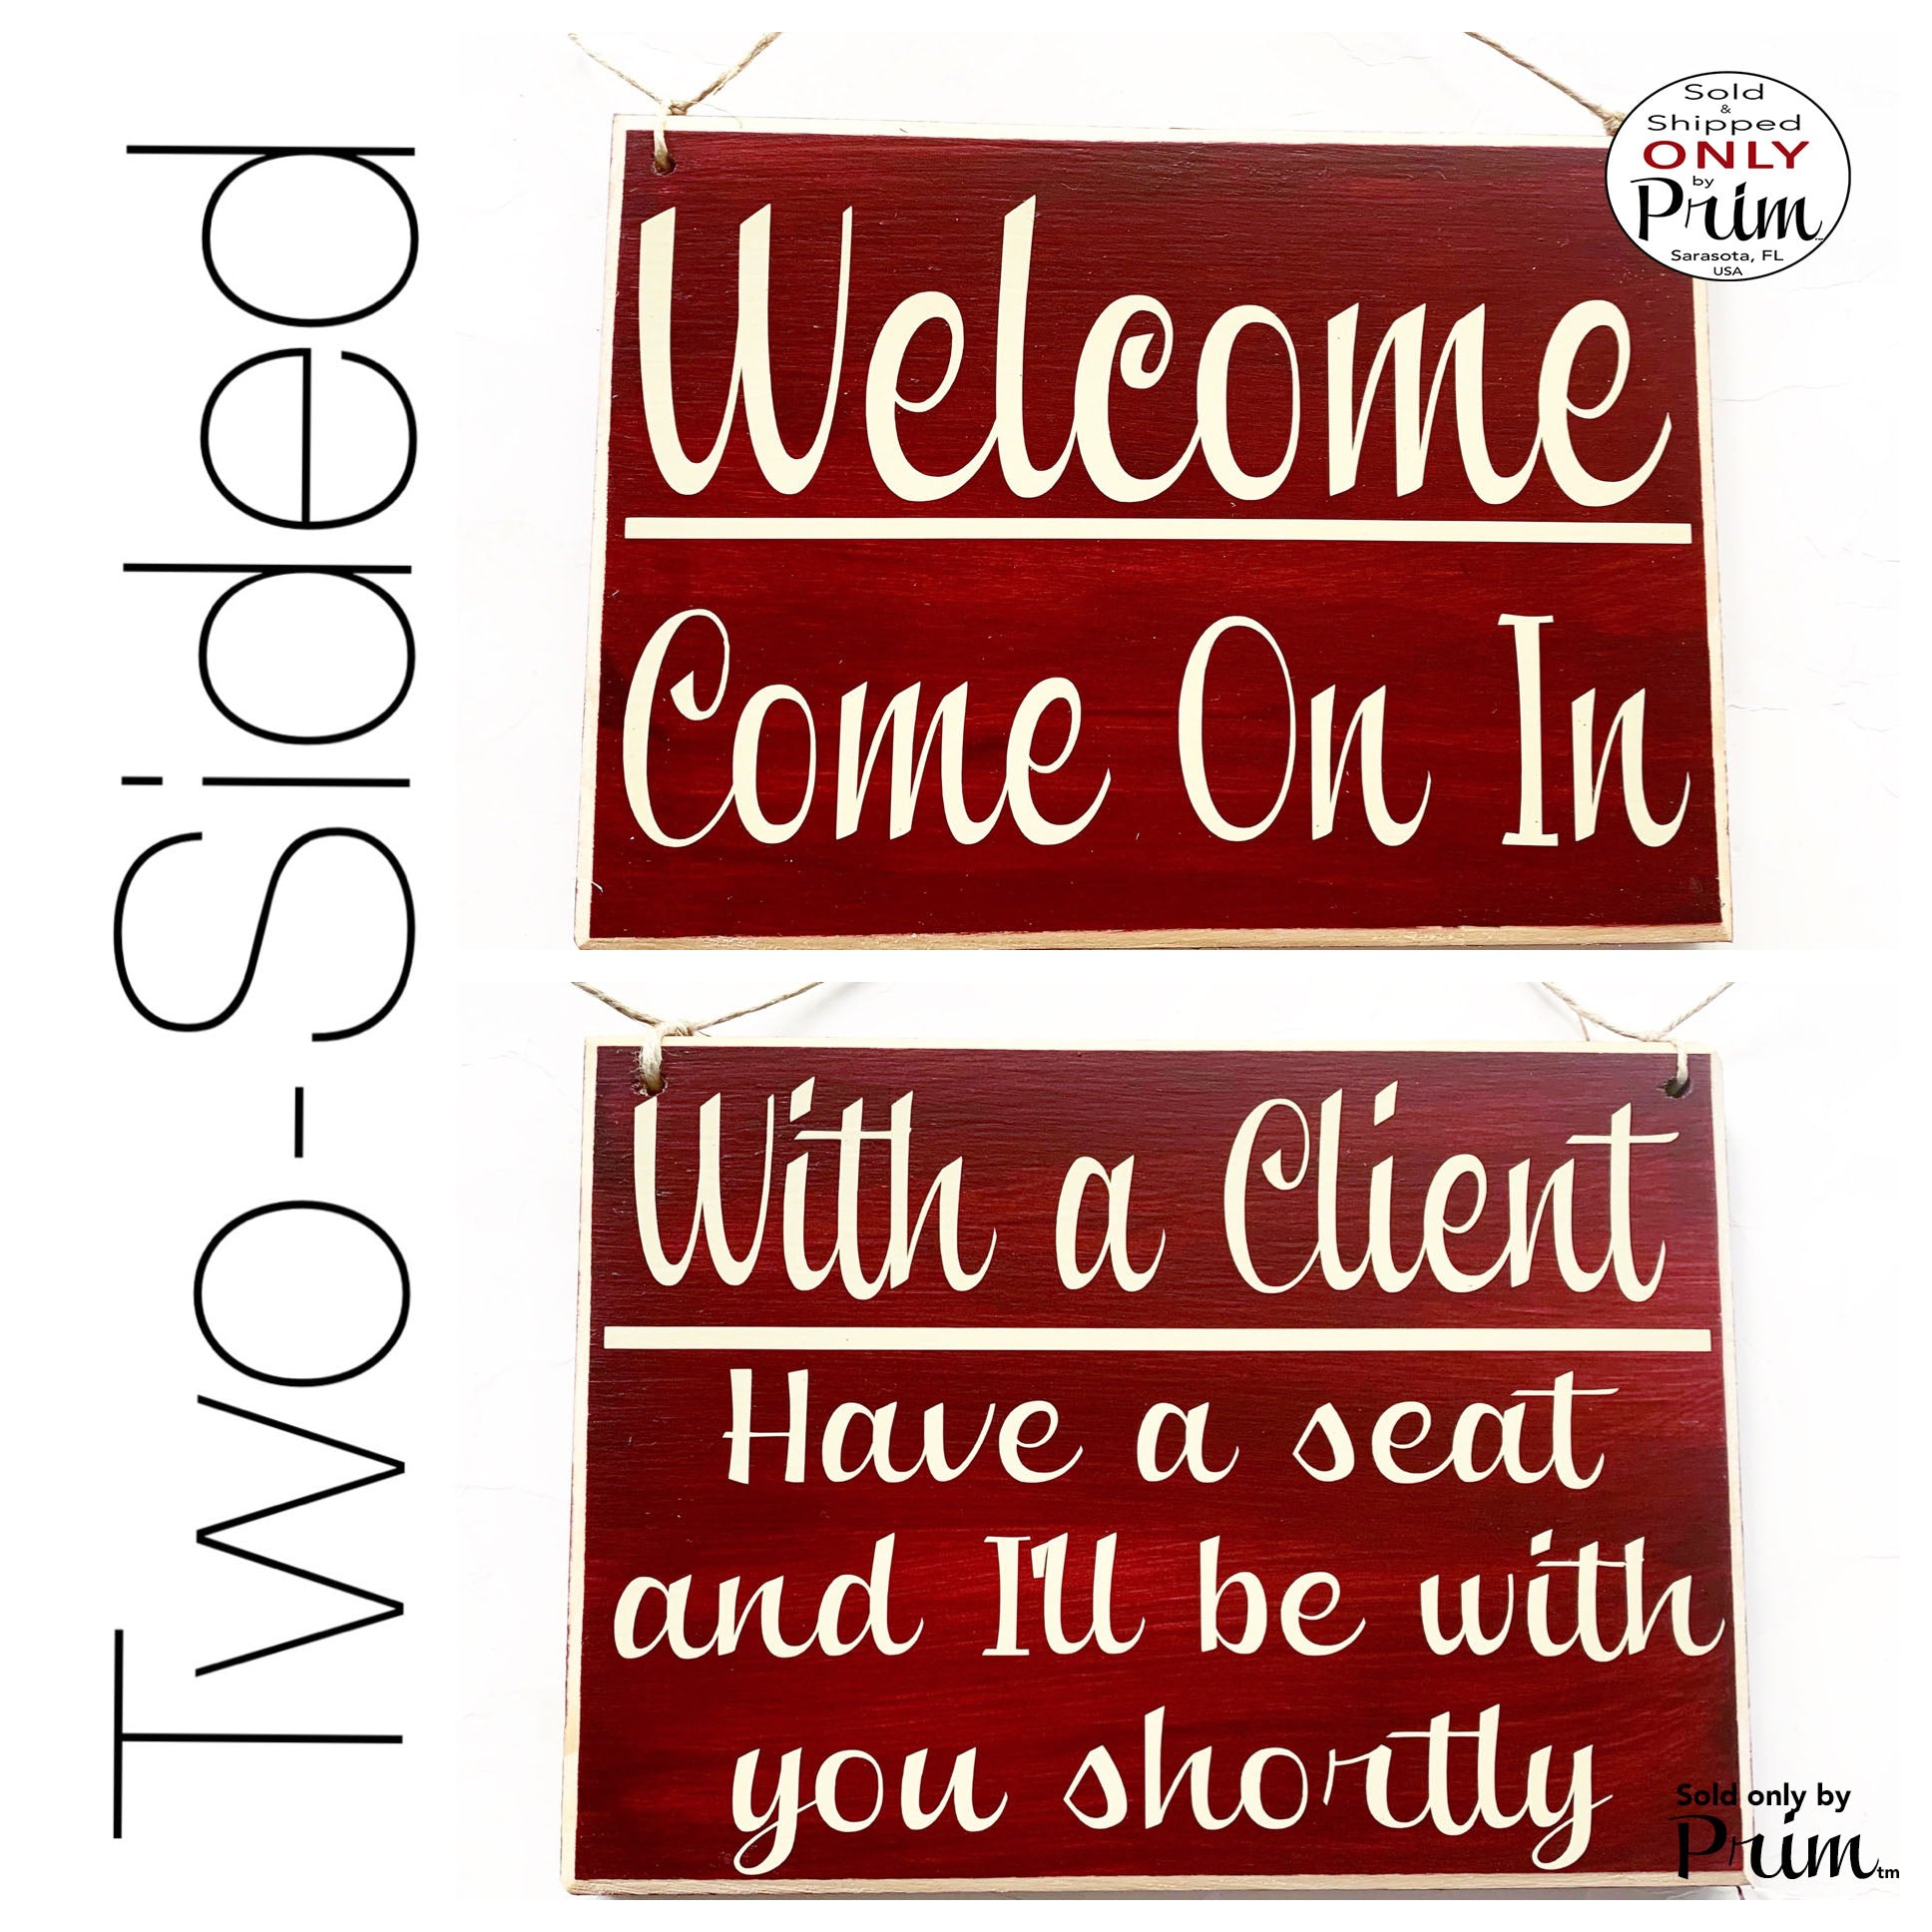 10x8 Welcome Come On In With a Client Have a Seat and I'll Be With You Shortly Custom Wood Sign | Spa Office In Session Meeting Door Plaque